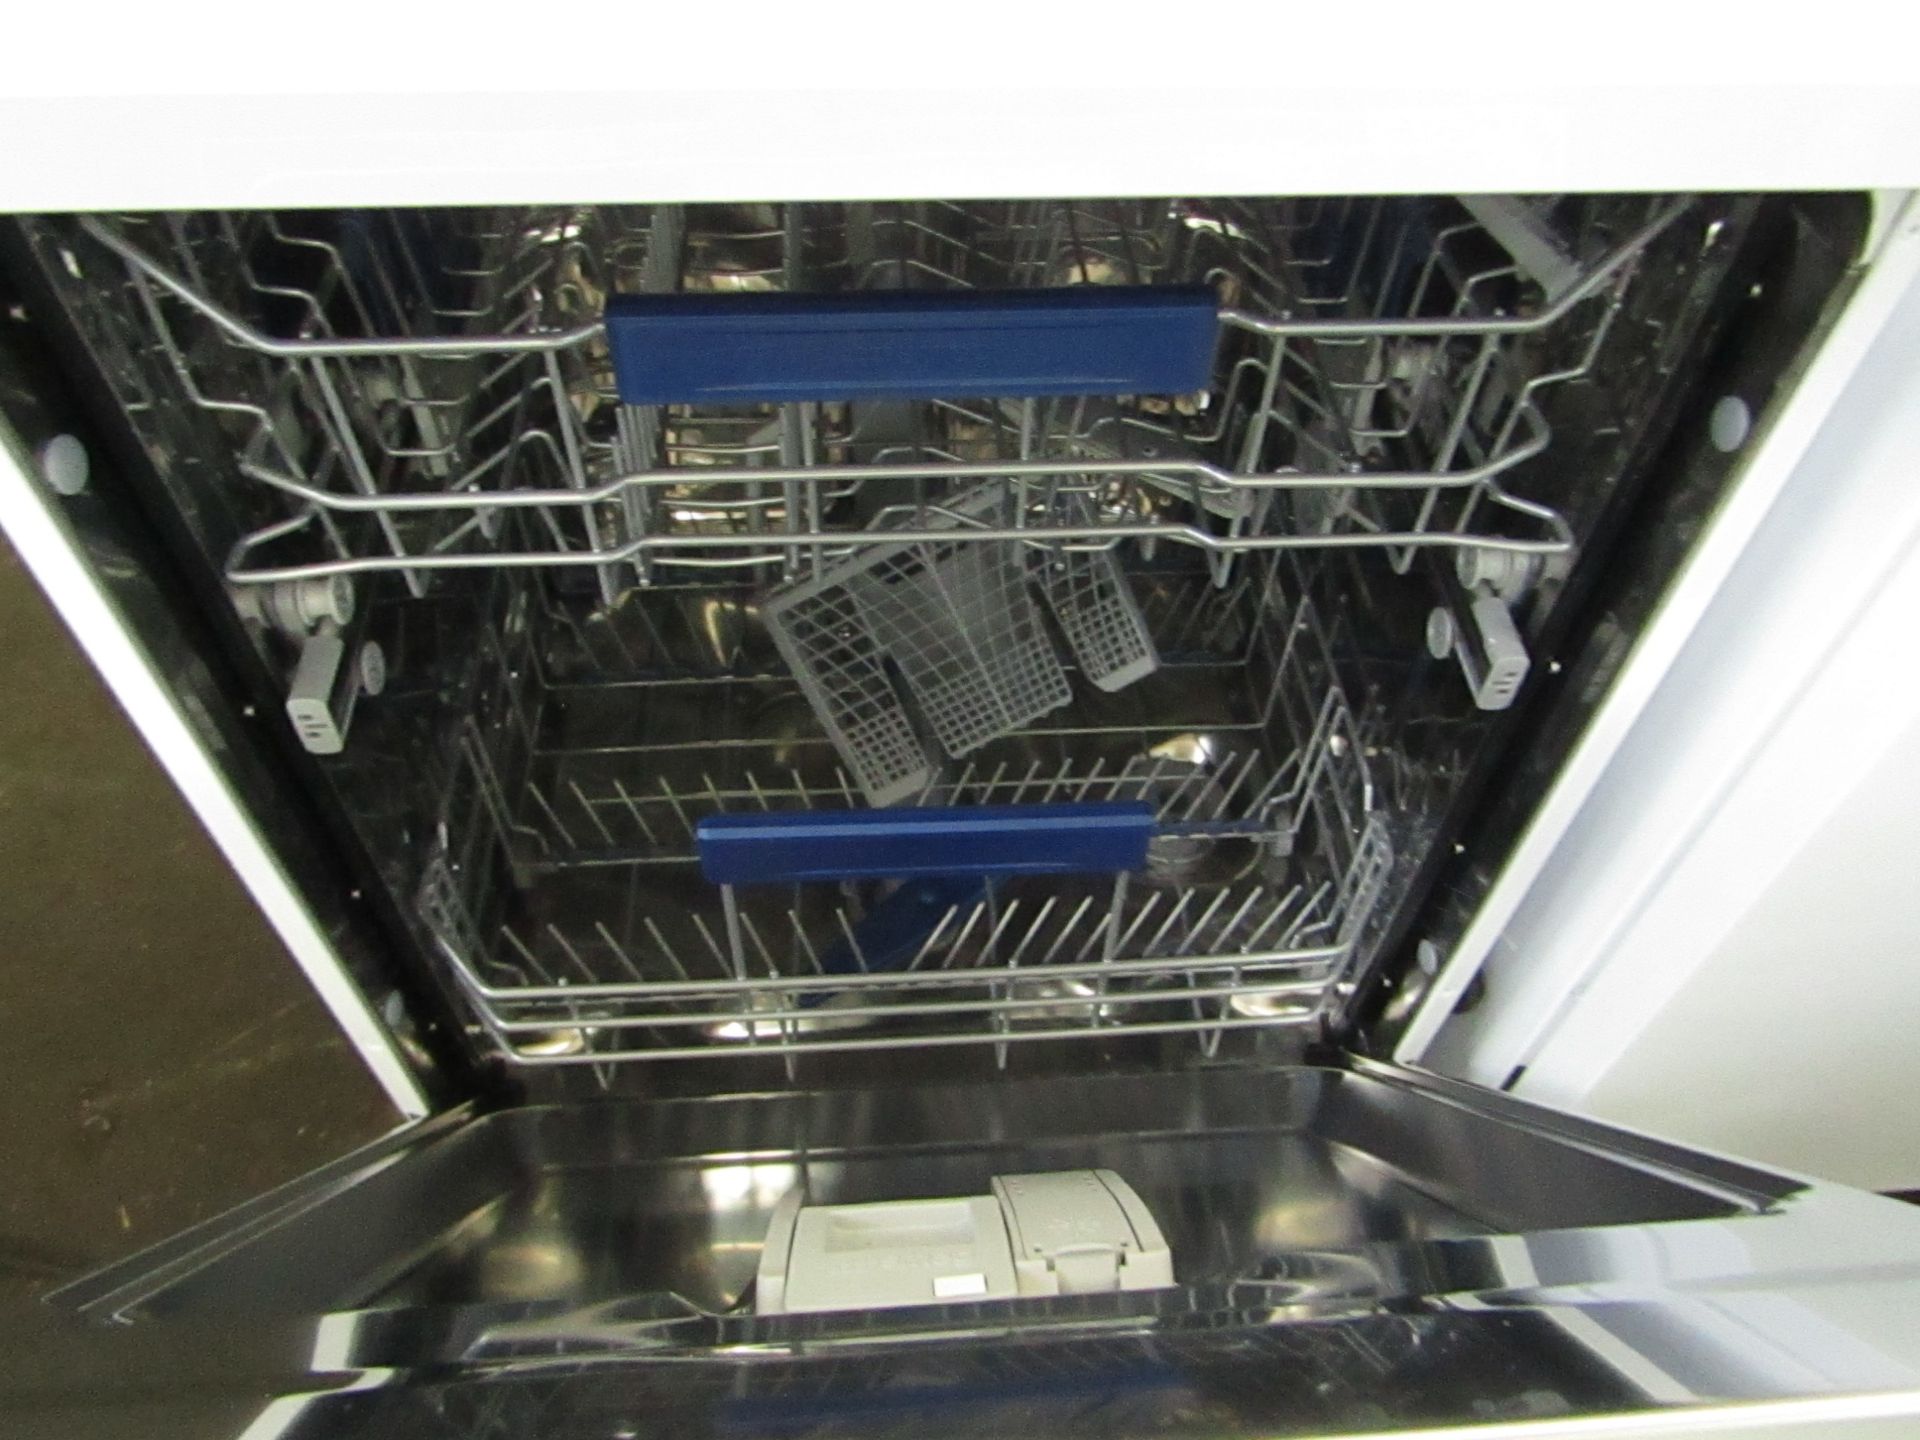 Smeg Dishwasher, Powers on and looks clean inside - Image 2 of 2